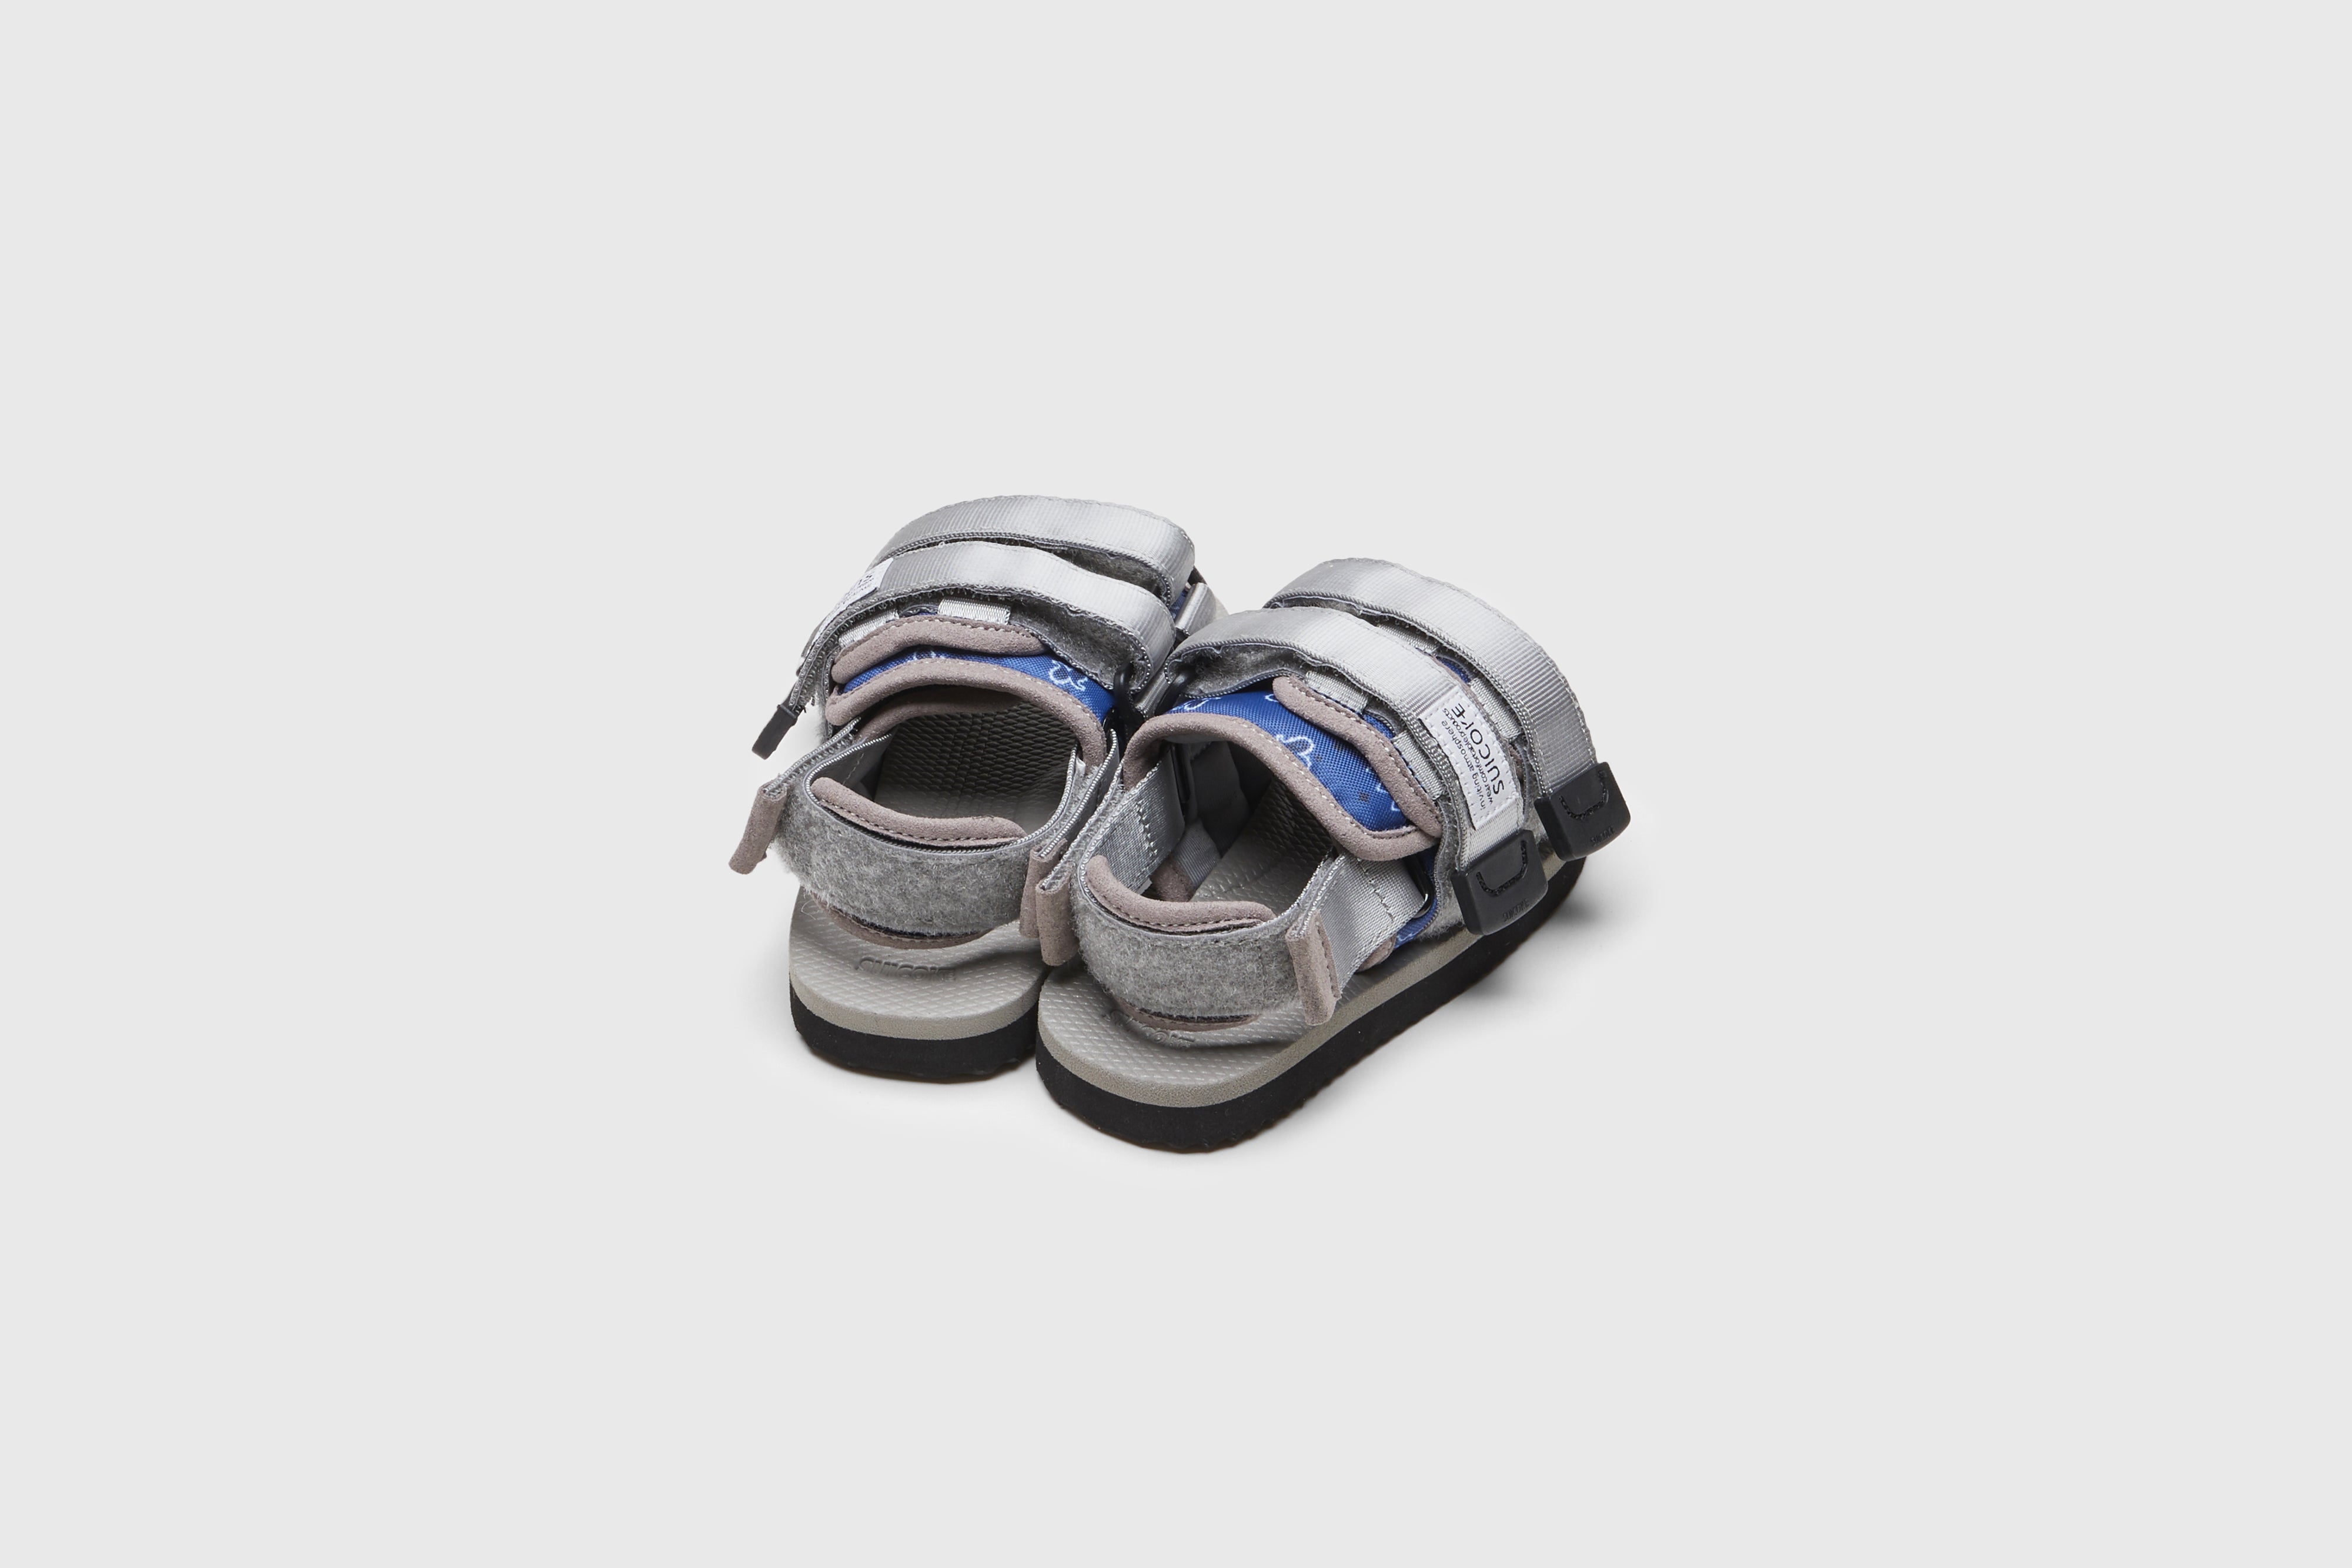 SUICOKE MOTO-2kids-PT05 slides with navy & gray nylon upper, navy & gray midsole and sole, strap and logo patch. From Spring/Summer 2023 collection on eightywingold Web Store, an official partner of SUICOKE. OG-056-2KIDS-PT05 NAVY X GRAY